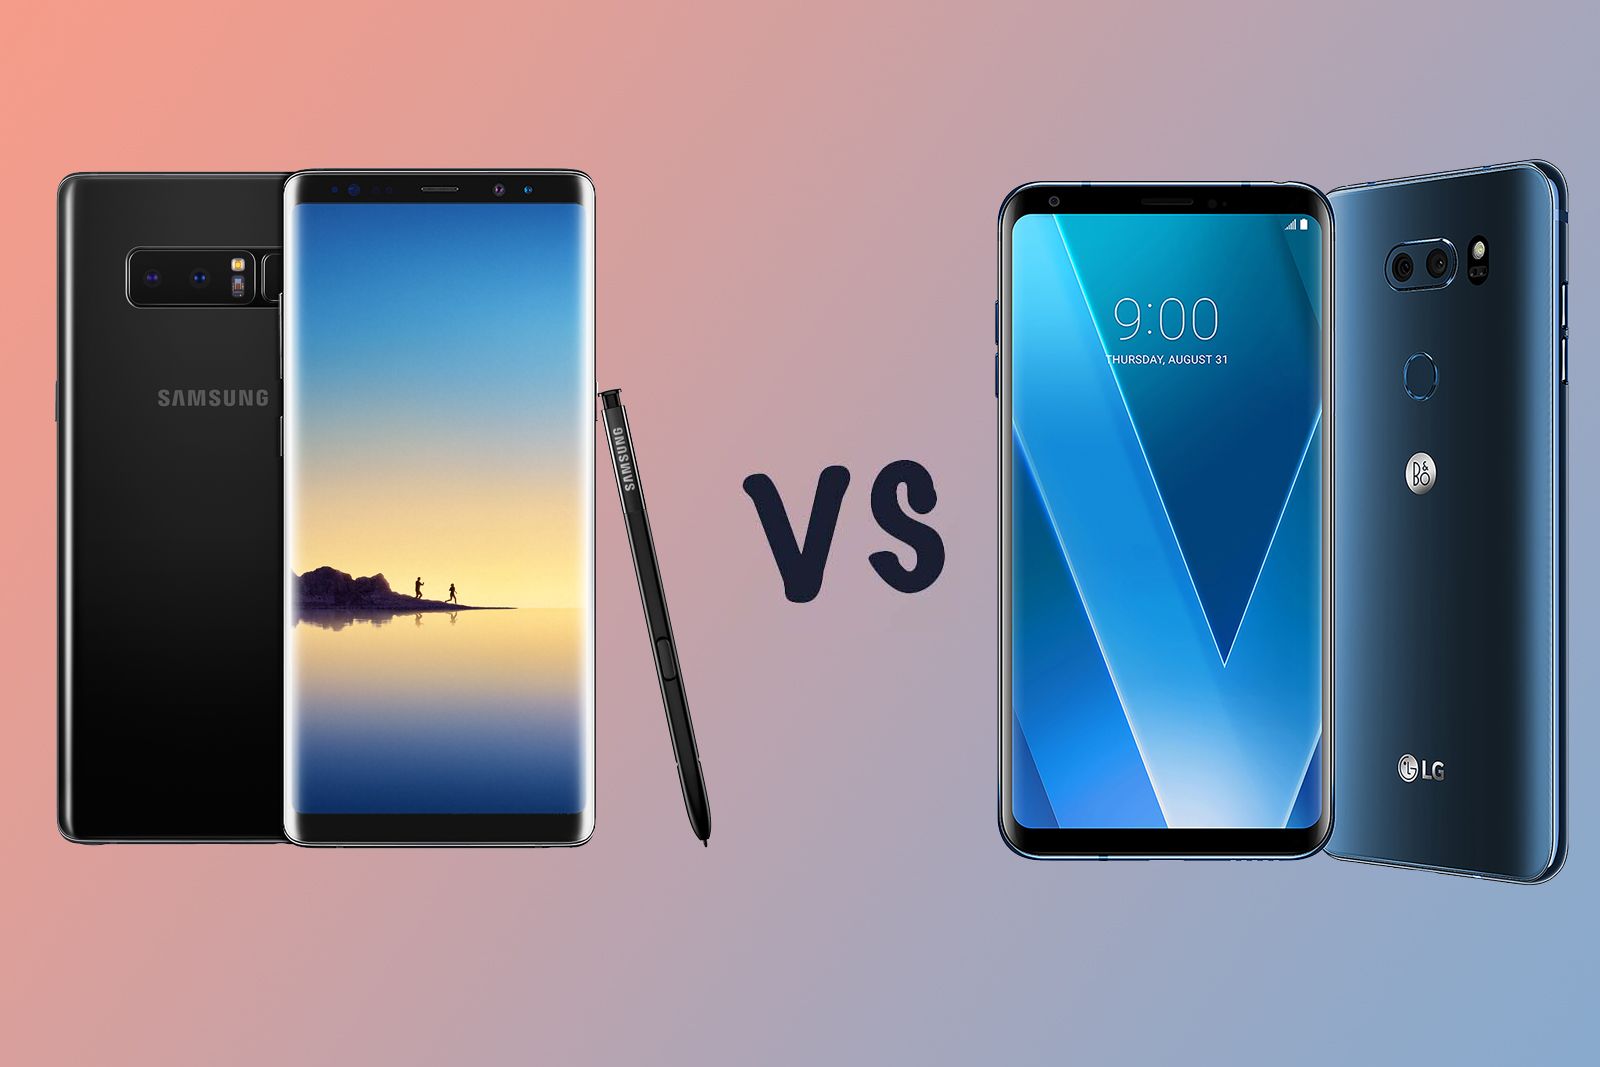 Samsung Galaxy Note 8 vs LG V30 Whats the difference image 1